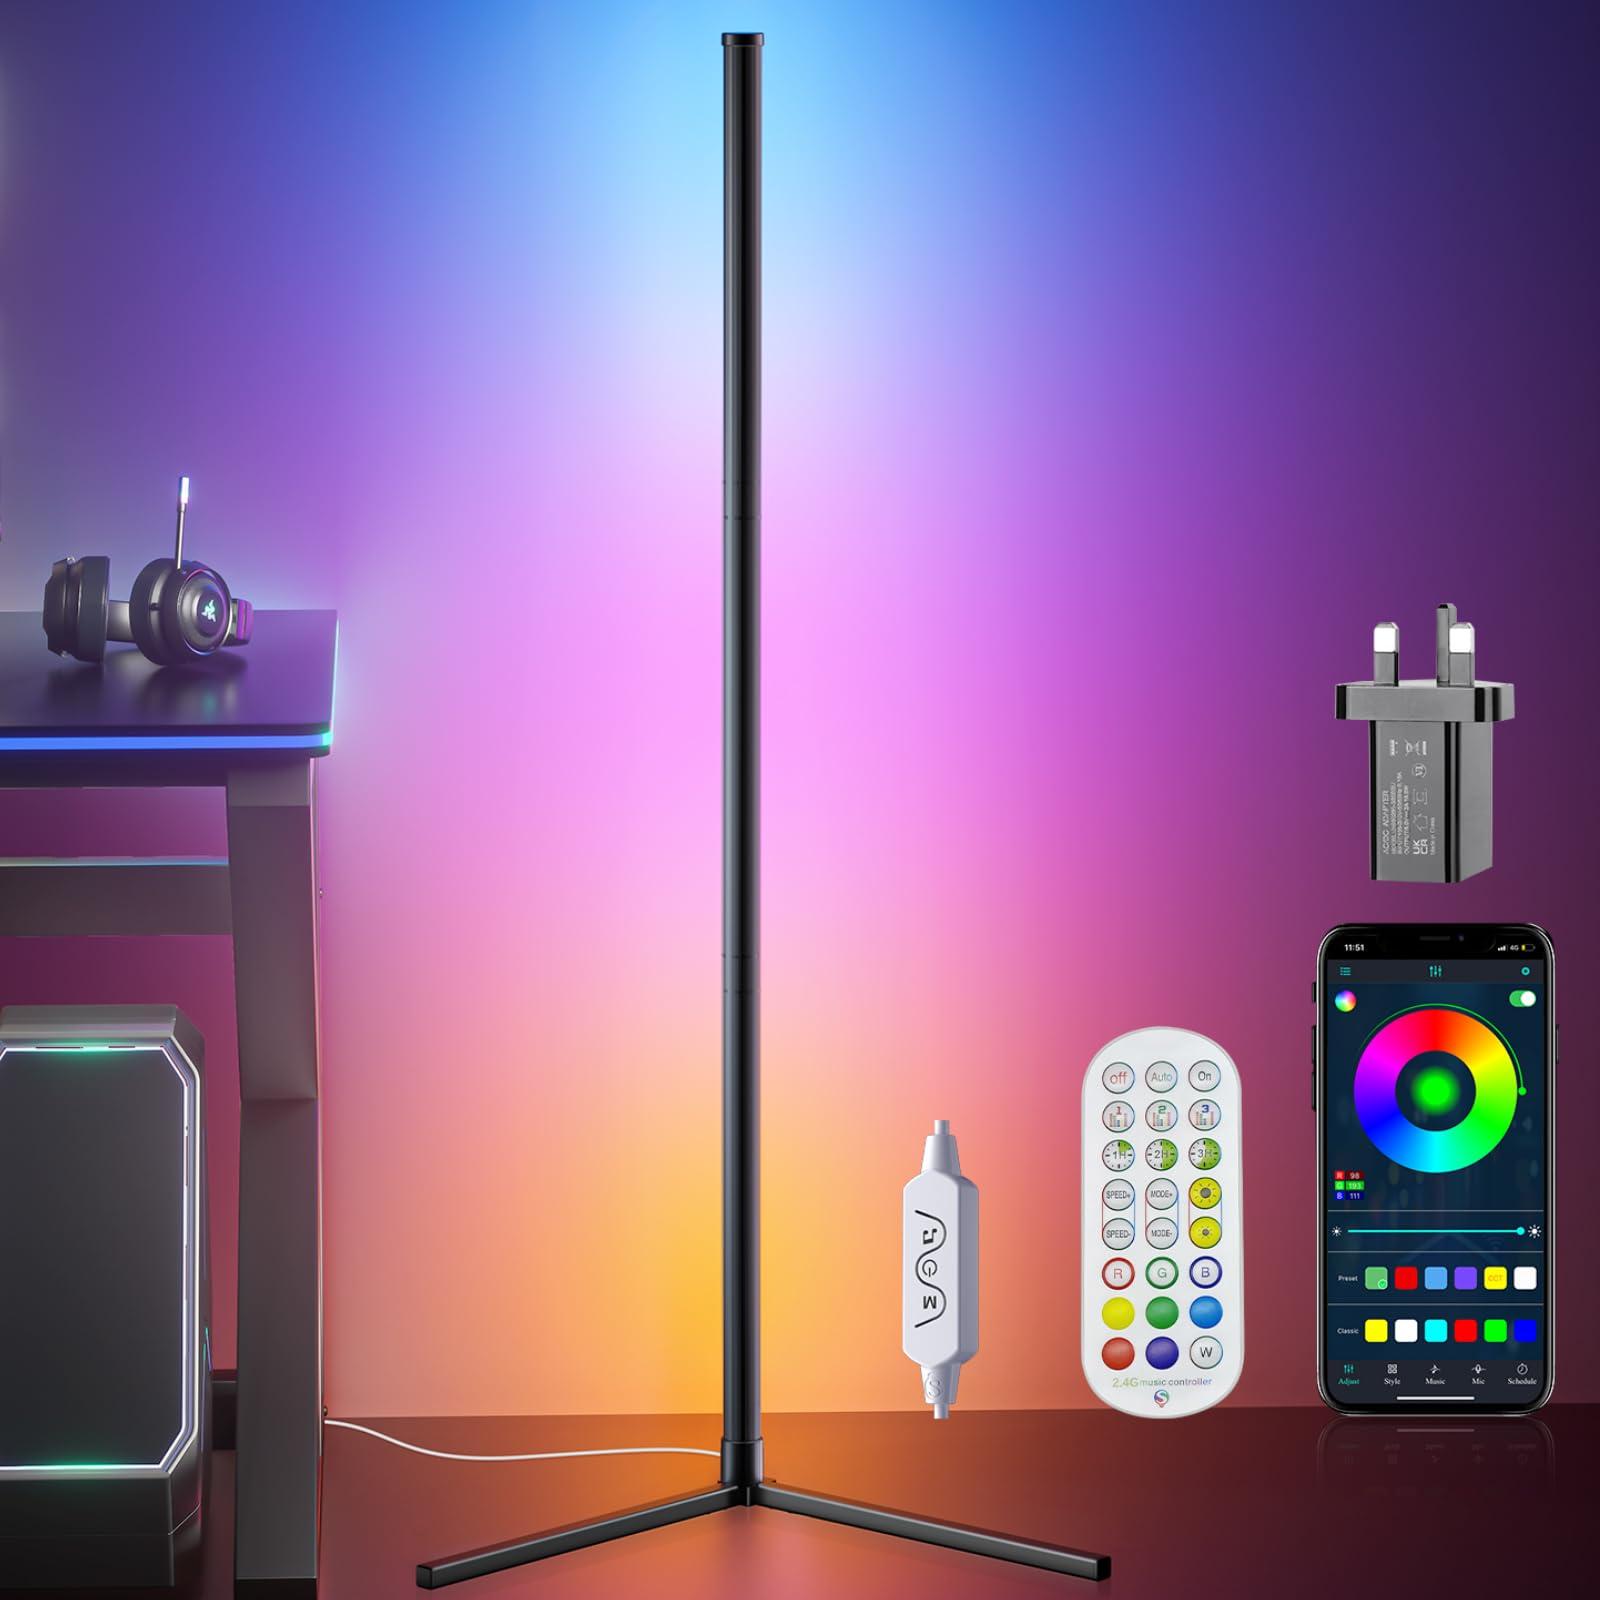 bedee Folding Floor Lamp: DIY Shaped RGB Floor Lamp with Music Sync and Timing, Modern 16 Million Color Changing Standing Light with Smart Remote & App Control for Living Room Gaming Room Bedroom